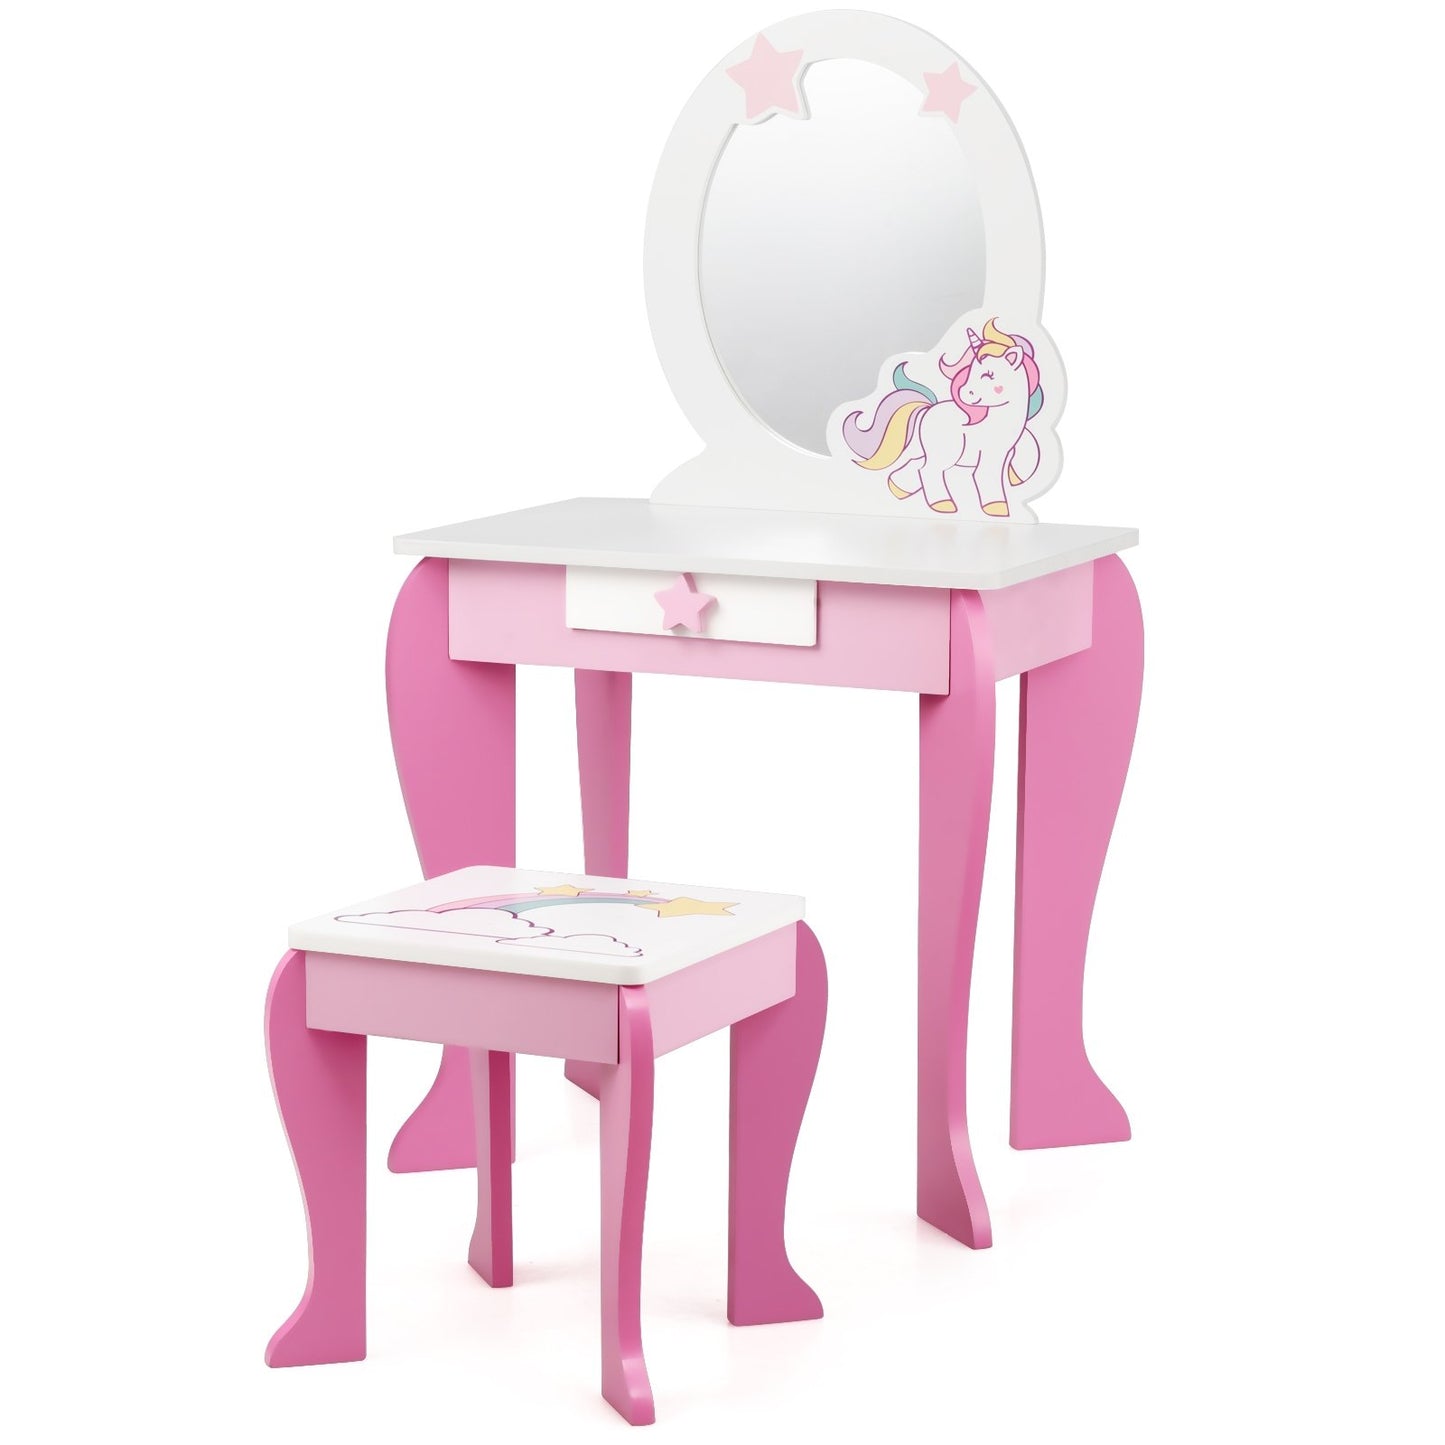 Kids Wooden Makeup Dressing Table and Chair Set with Mirror and Drawer, Pink